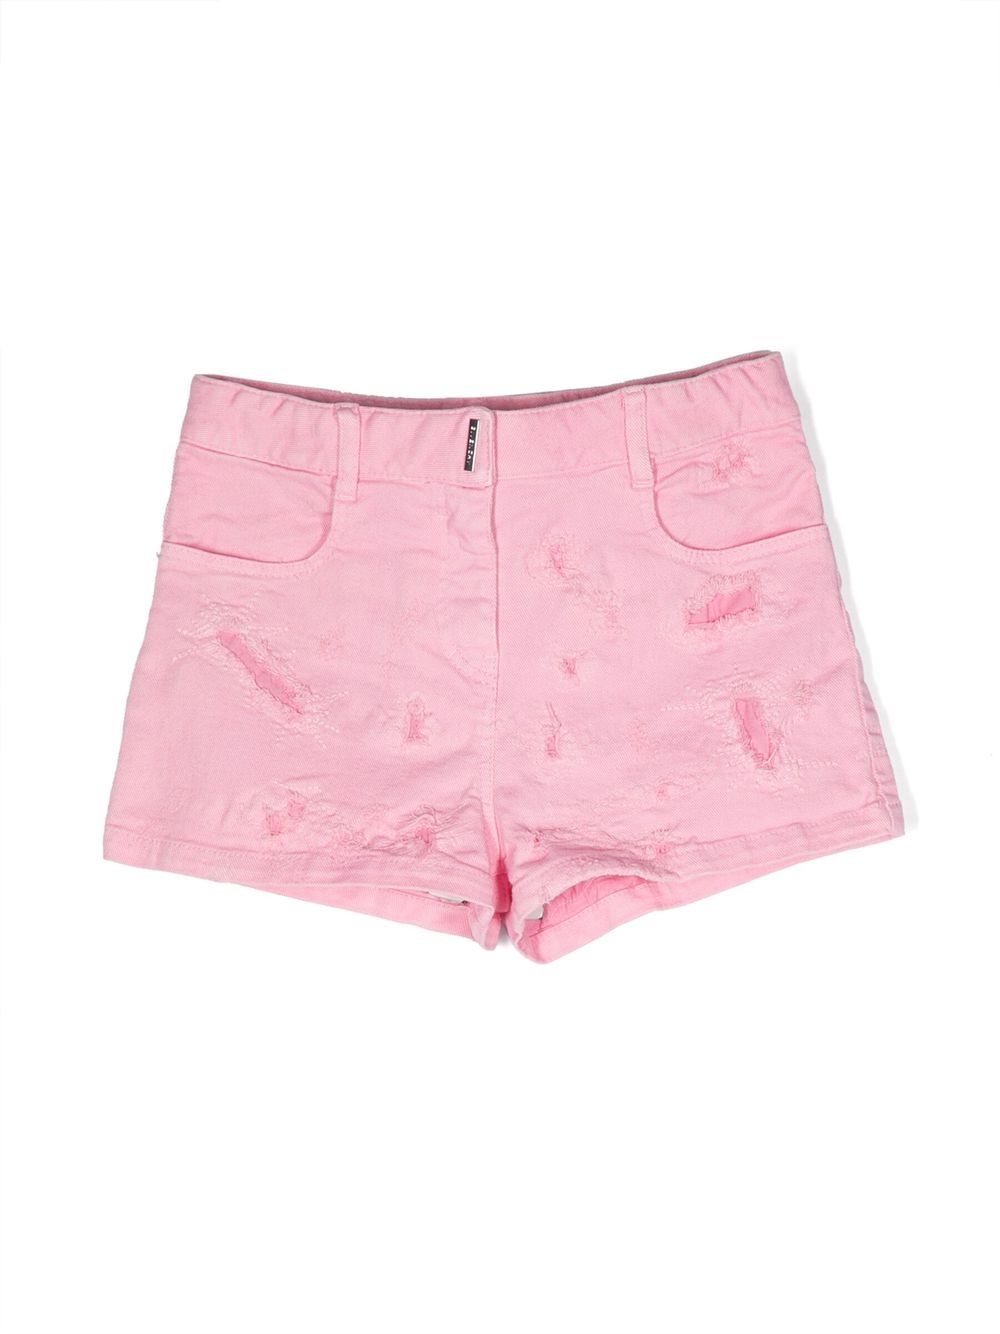 Givenchy Kids Jeans-Shorts im Distressed-Look - Rosa von Givenchy Kids